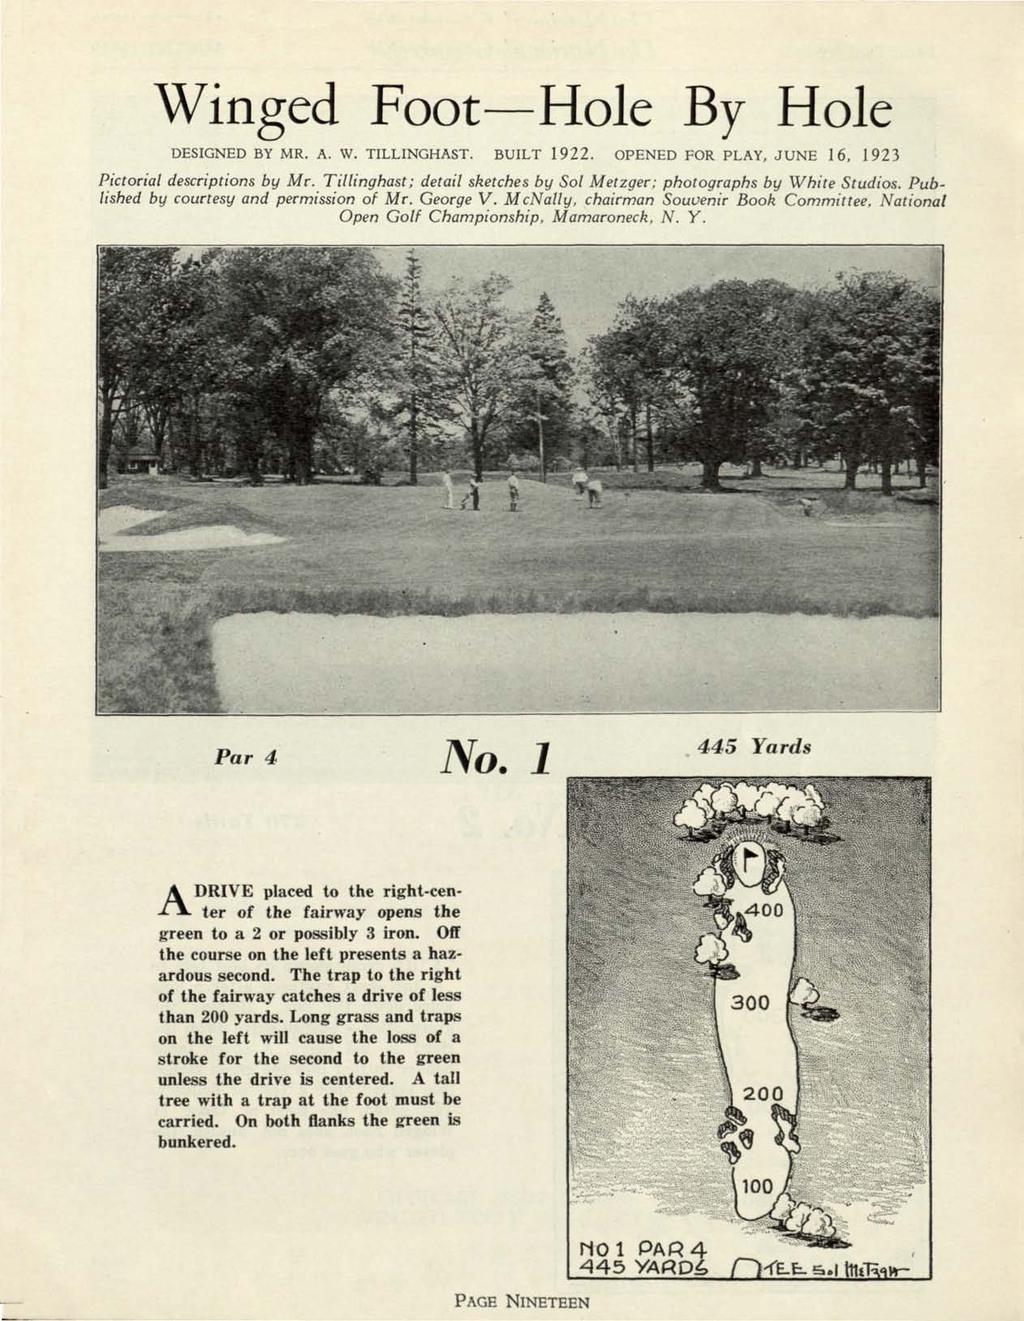 Winged Foot Hole By Hole DESIGNED BY MR. A. W. TILLINGHAST. BUILT 1922. OPENED FOR PLAY, JUNE 16, 1923 Pictorial descriptions by Mr.